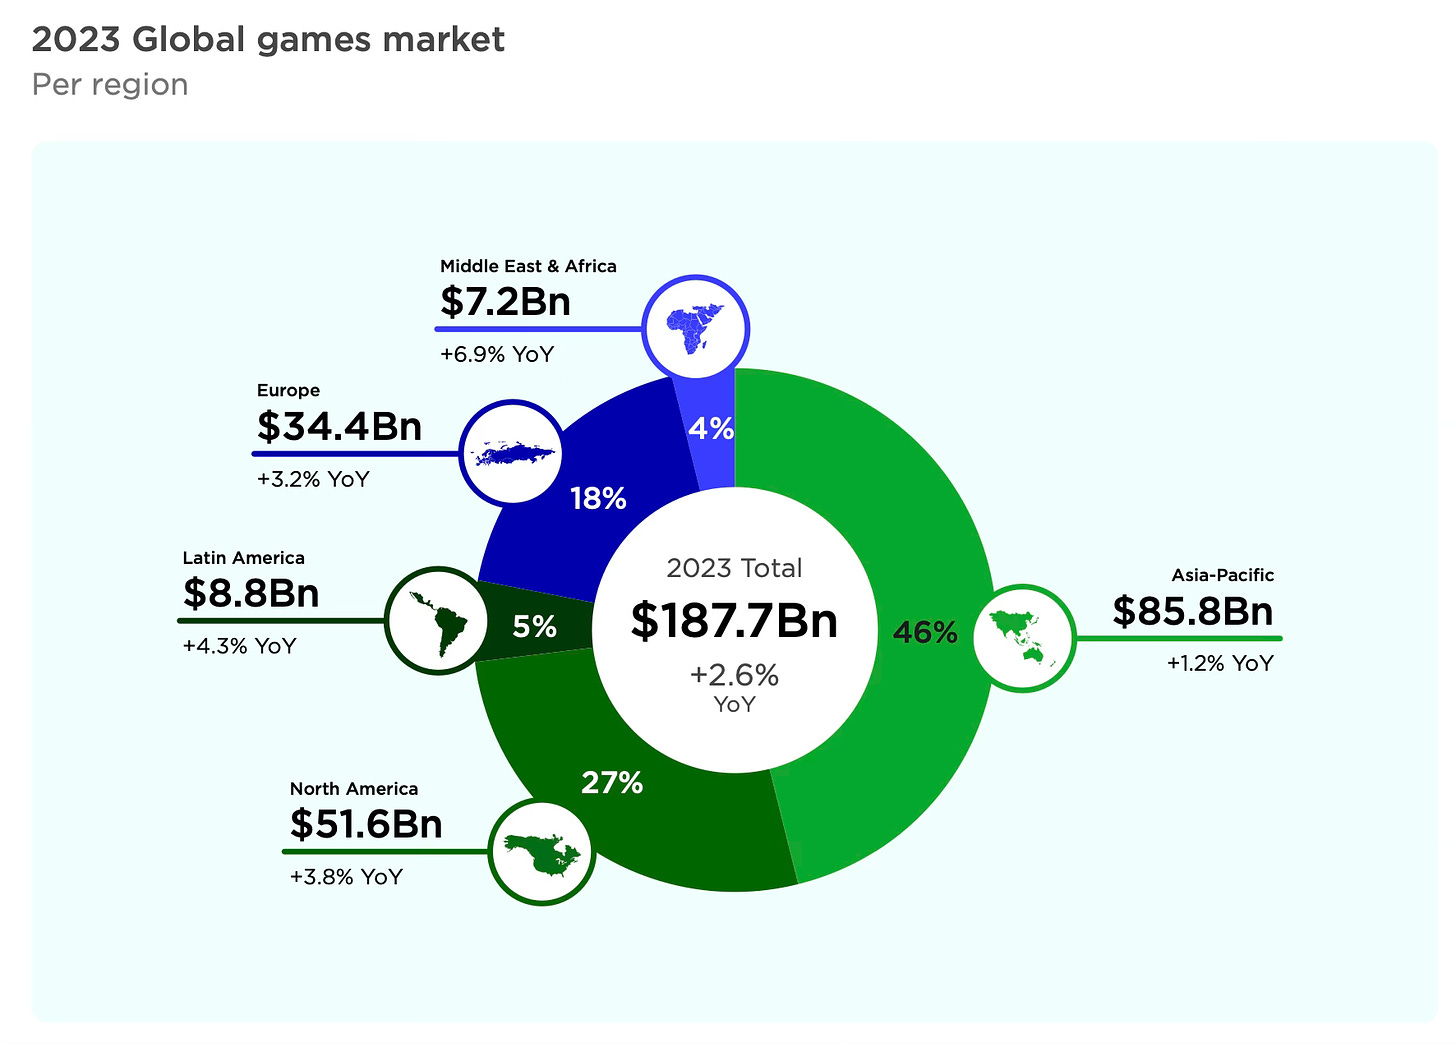 Inside the European Gaming Market: Trends, Opportunities, and